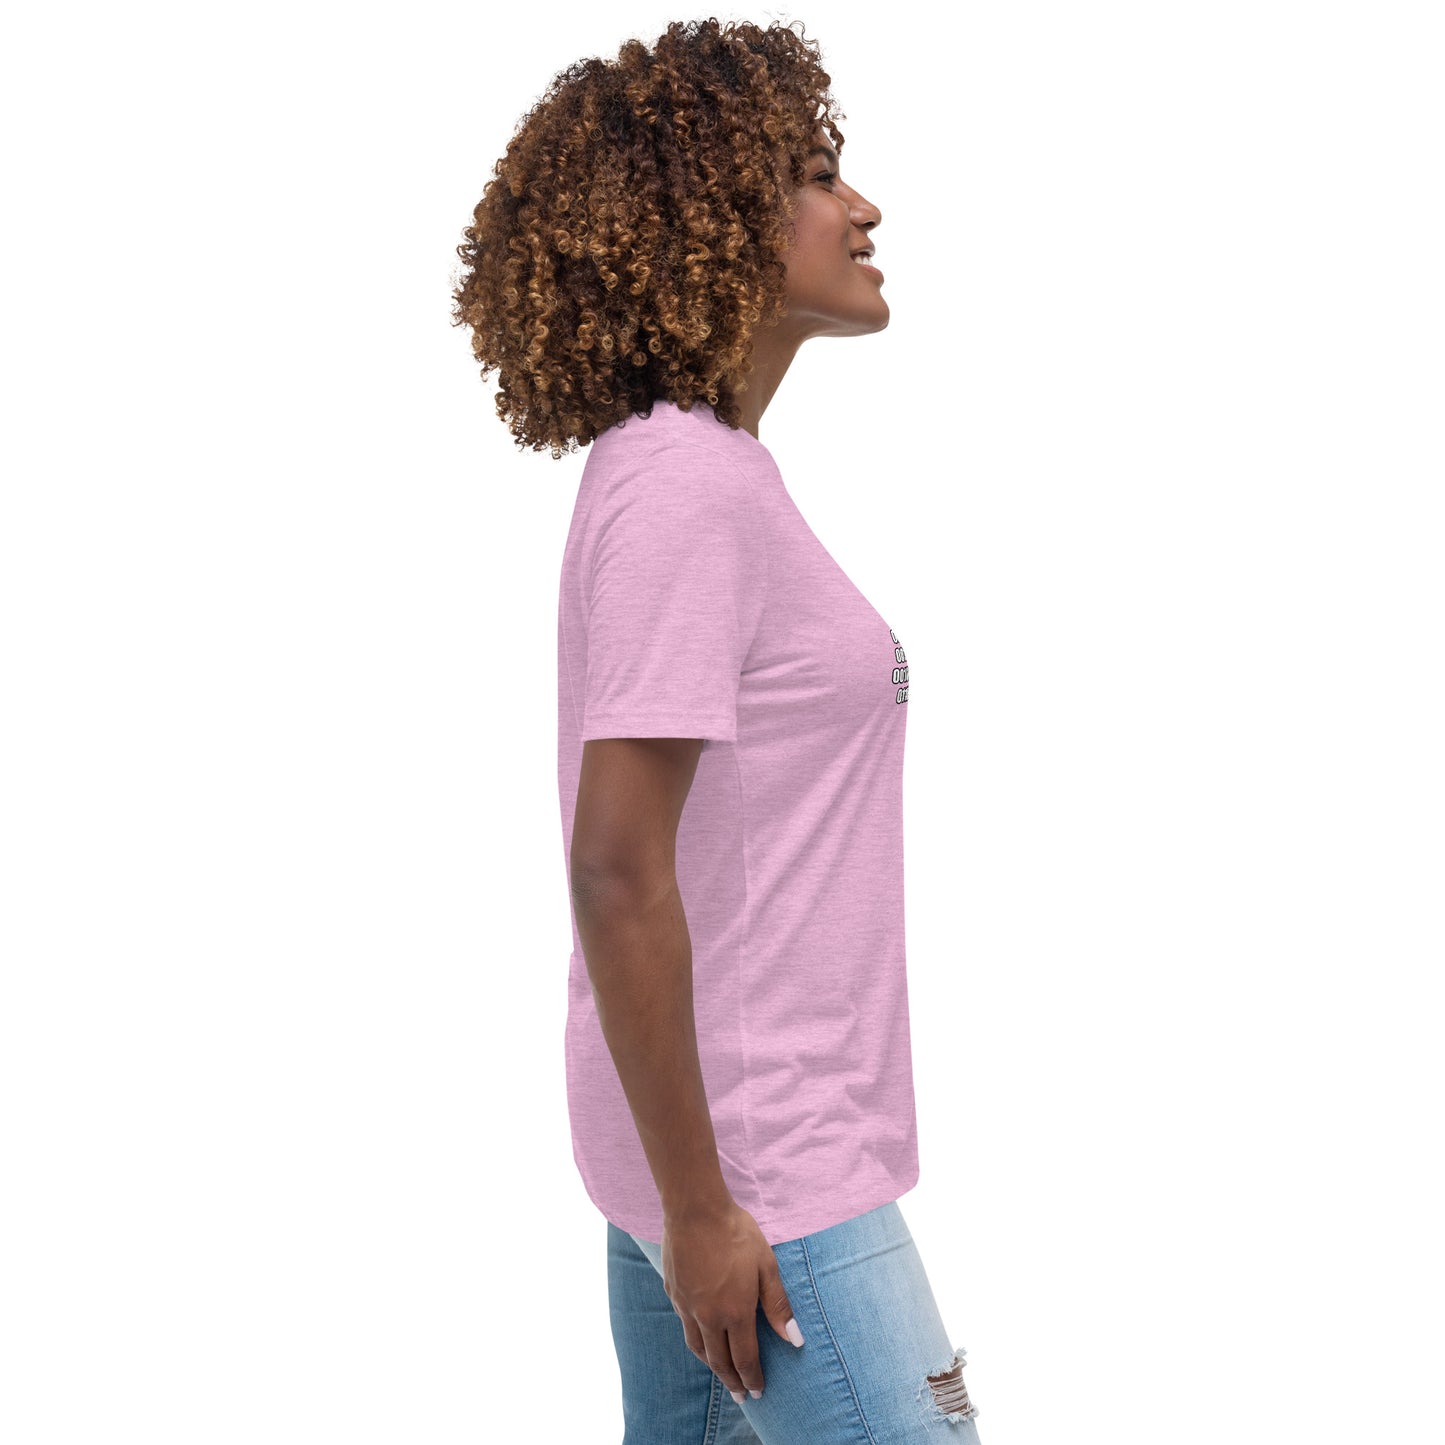 Woman with lilac t-shirt with binary code "If you can read this"